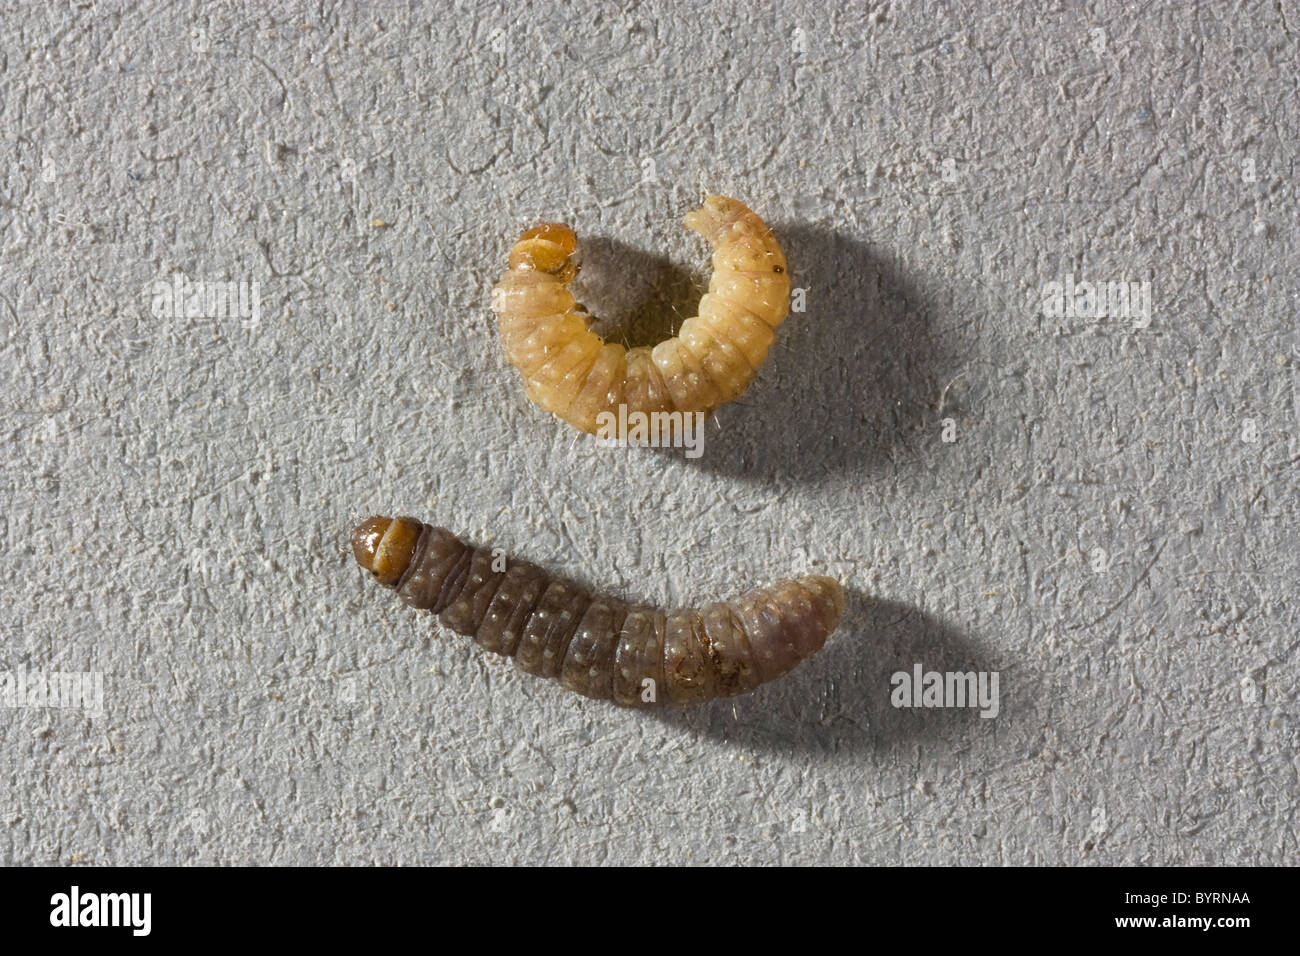 https://c8.alamy.com/comp/BYRNAA/agriculture-european-grapevine-moth-lobesia-botrana-2nd-and-4th-stage-BYRNAA.jpg